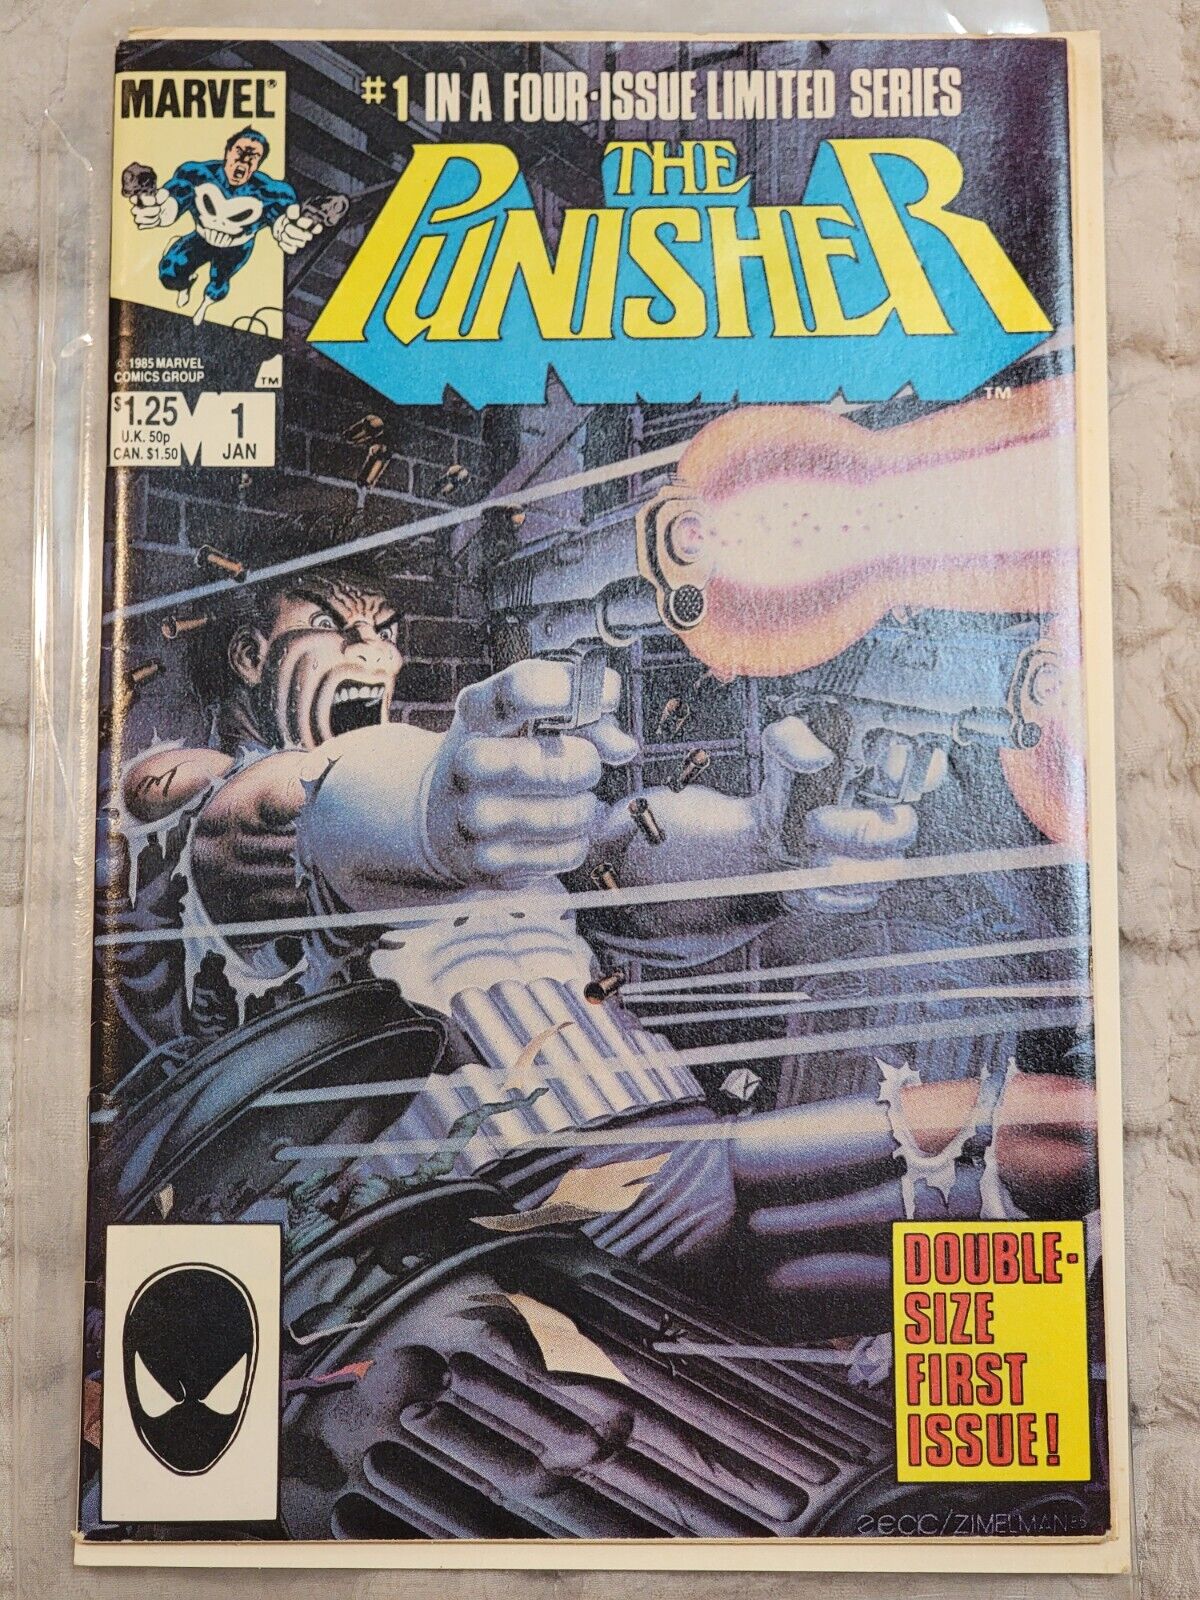 The Punisher #1 (1985) High Grade Marvel Comic Book 1st Print Solo Series